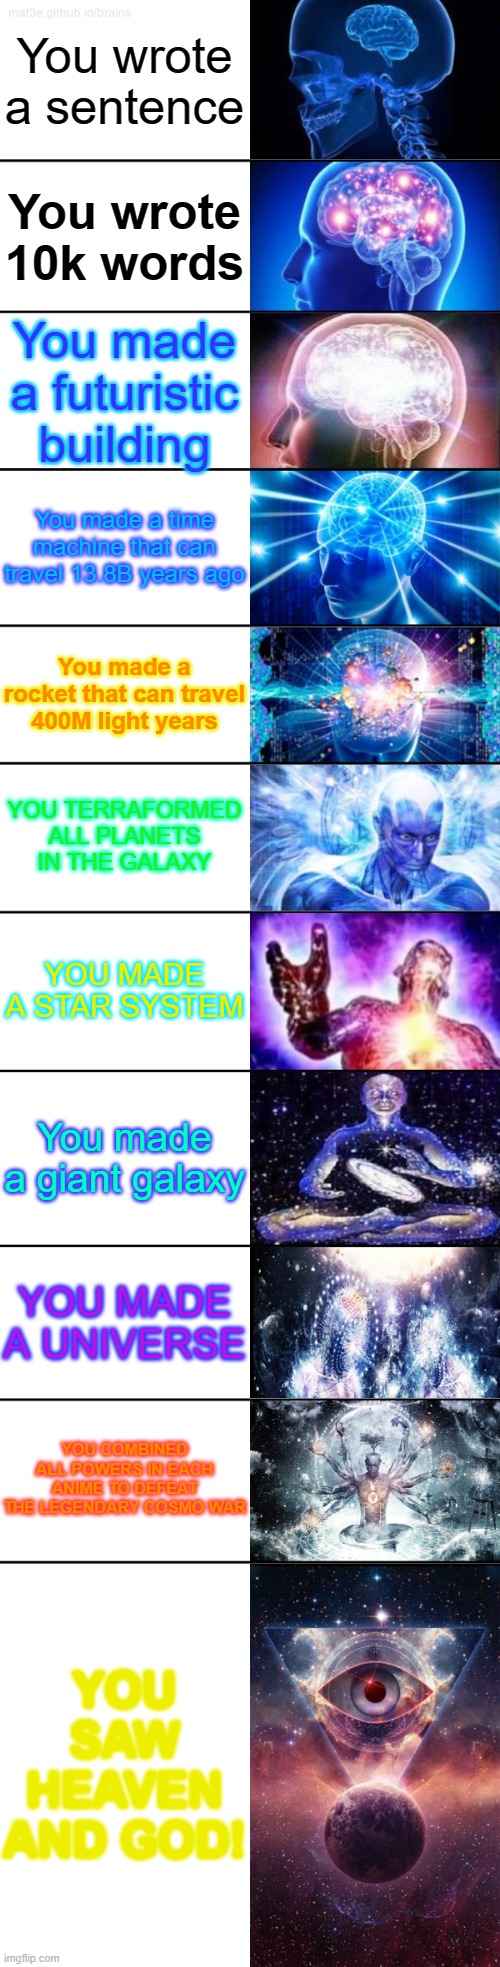 Is this even possible?! | You wrote a sentence; You wrote 10k words; You made a futuristic building; You made a time machine that can travel 13.8B years ago; You made a rocket that can travel 400M light years; YOU TERRAFORMED ALL PLANETS IN THE GALAXY; YOU MADE A STAR SYSTEM; You made a giant galaxy; YOU MADE A UNIVERSE; YOU COMBINED ALL POWERS IN EACH ANIME TO DEFEAT THE LEGENDARY COSMO WAR; YOU SAW HEAVEN AND GOD! | image tagged in memes,11-tier expanding brain,heaven,expanding brain | made w/ Imgflip meme maker